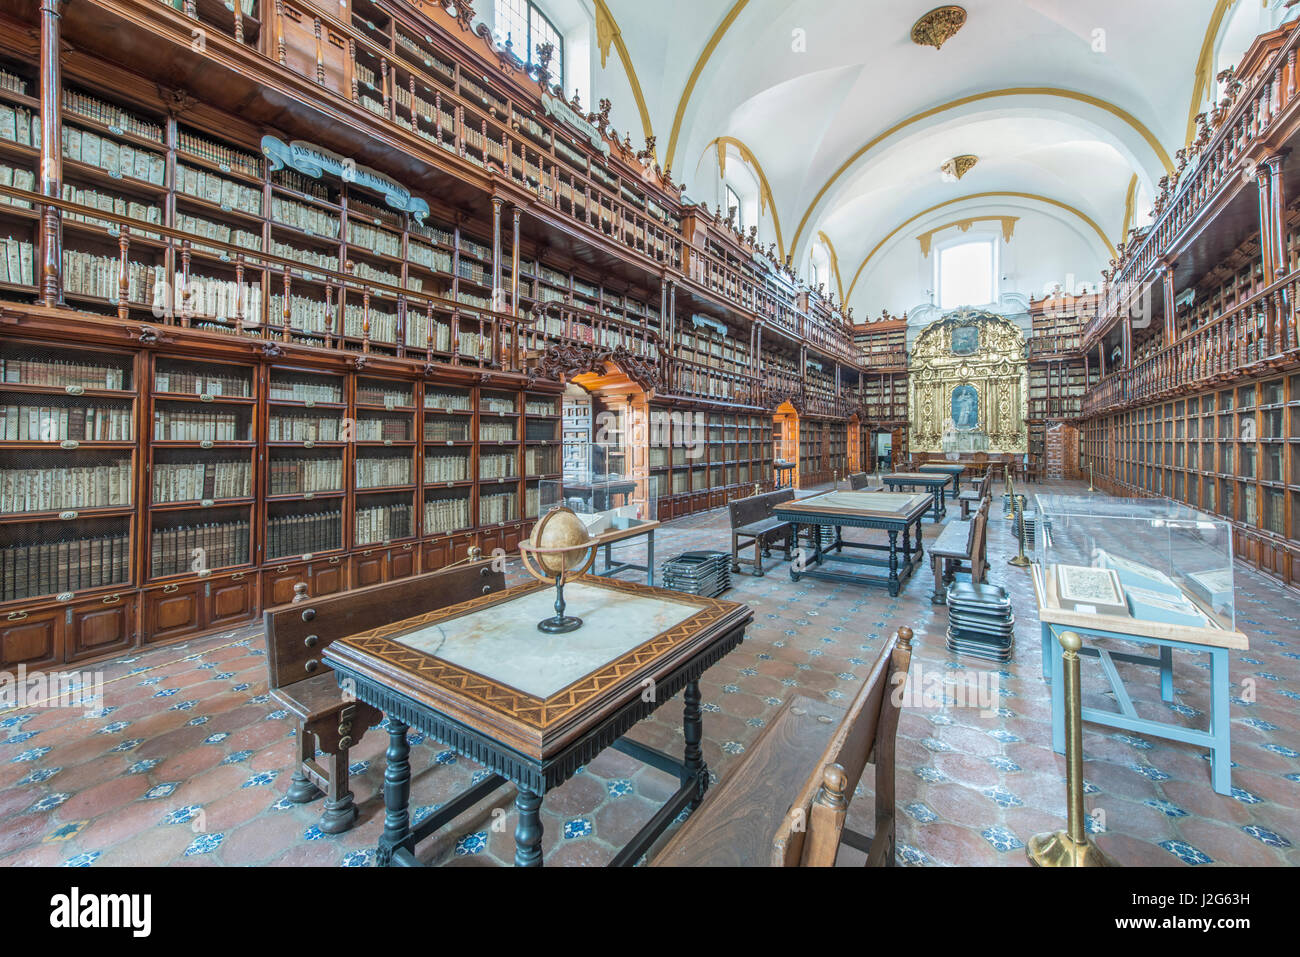 Mexico, Puebla, Casa de la Cultura, Biblioteca Palafoxiana, The first public library in North America established in 1646. This building was constructed in 1773. (Large format sizes available) Stock Photo